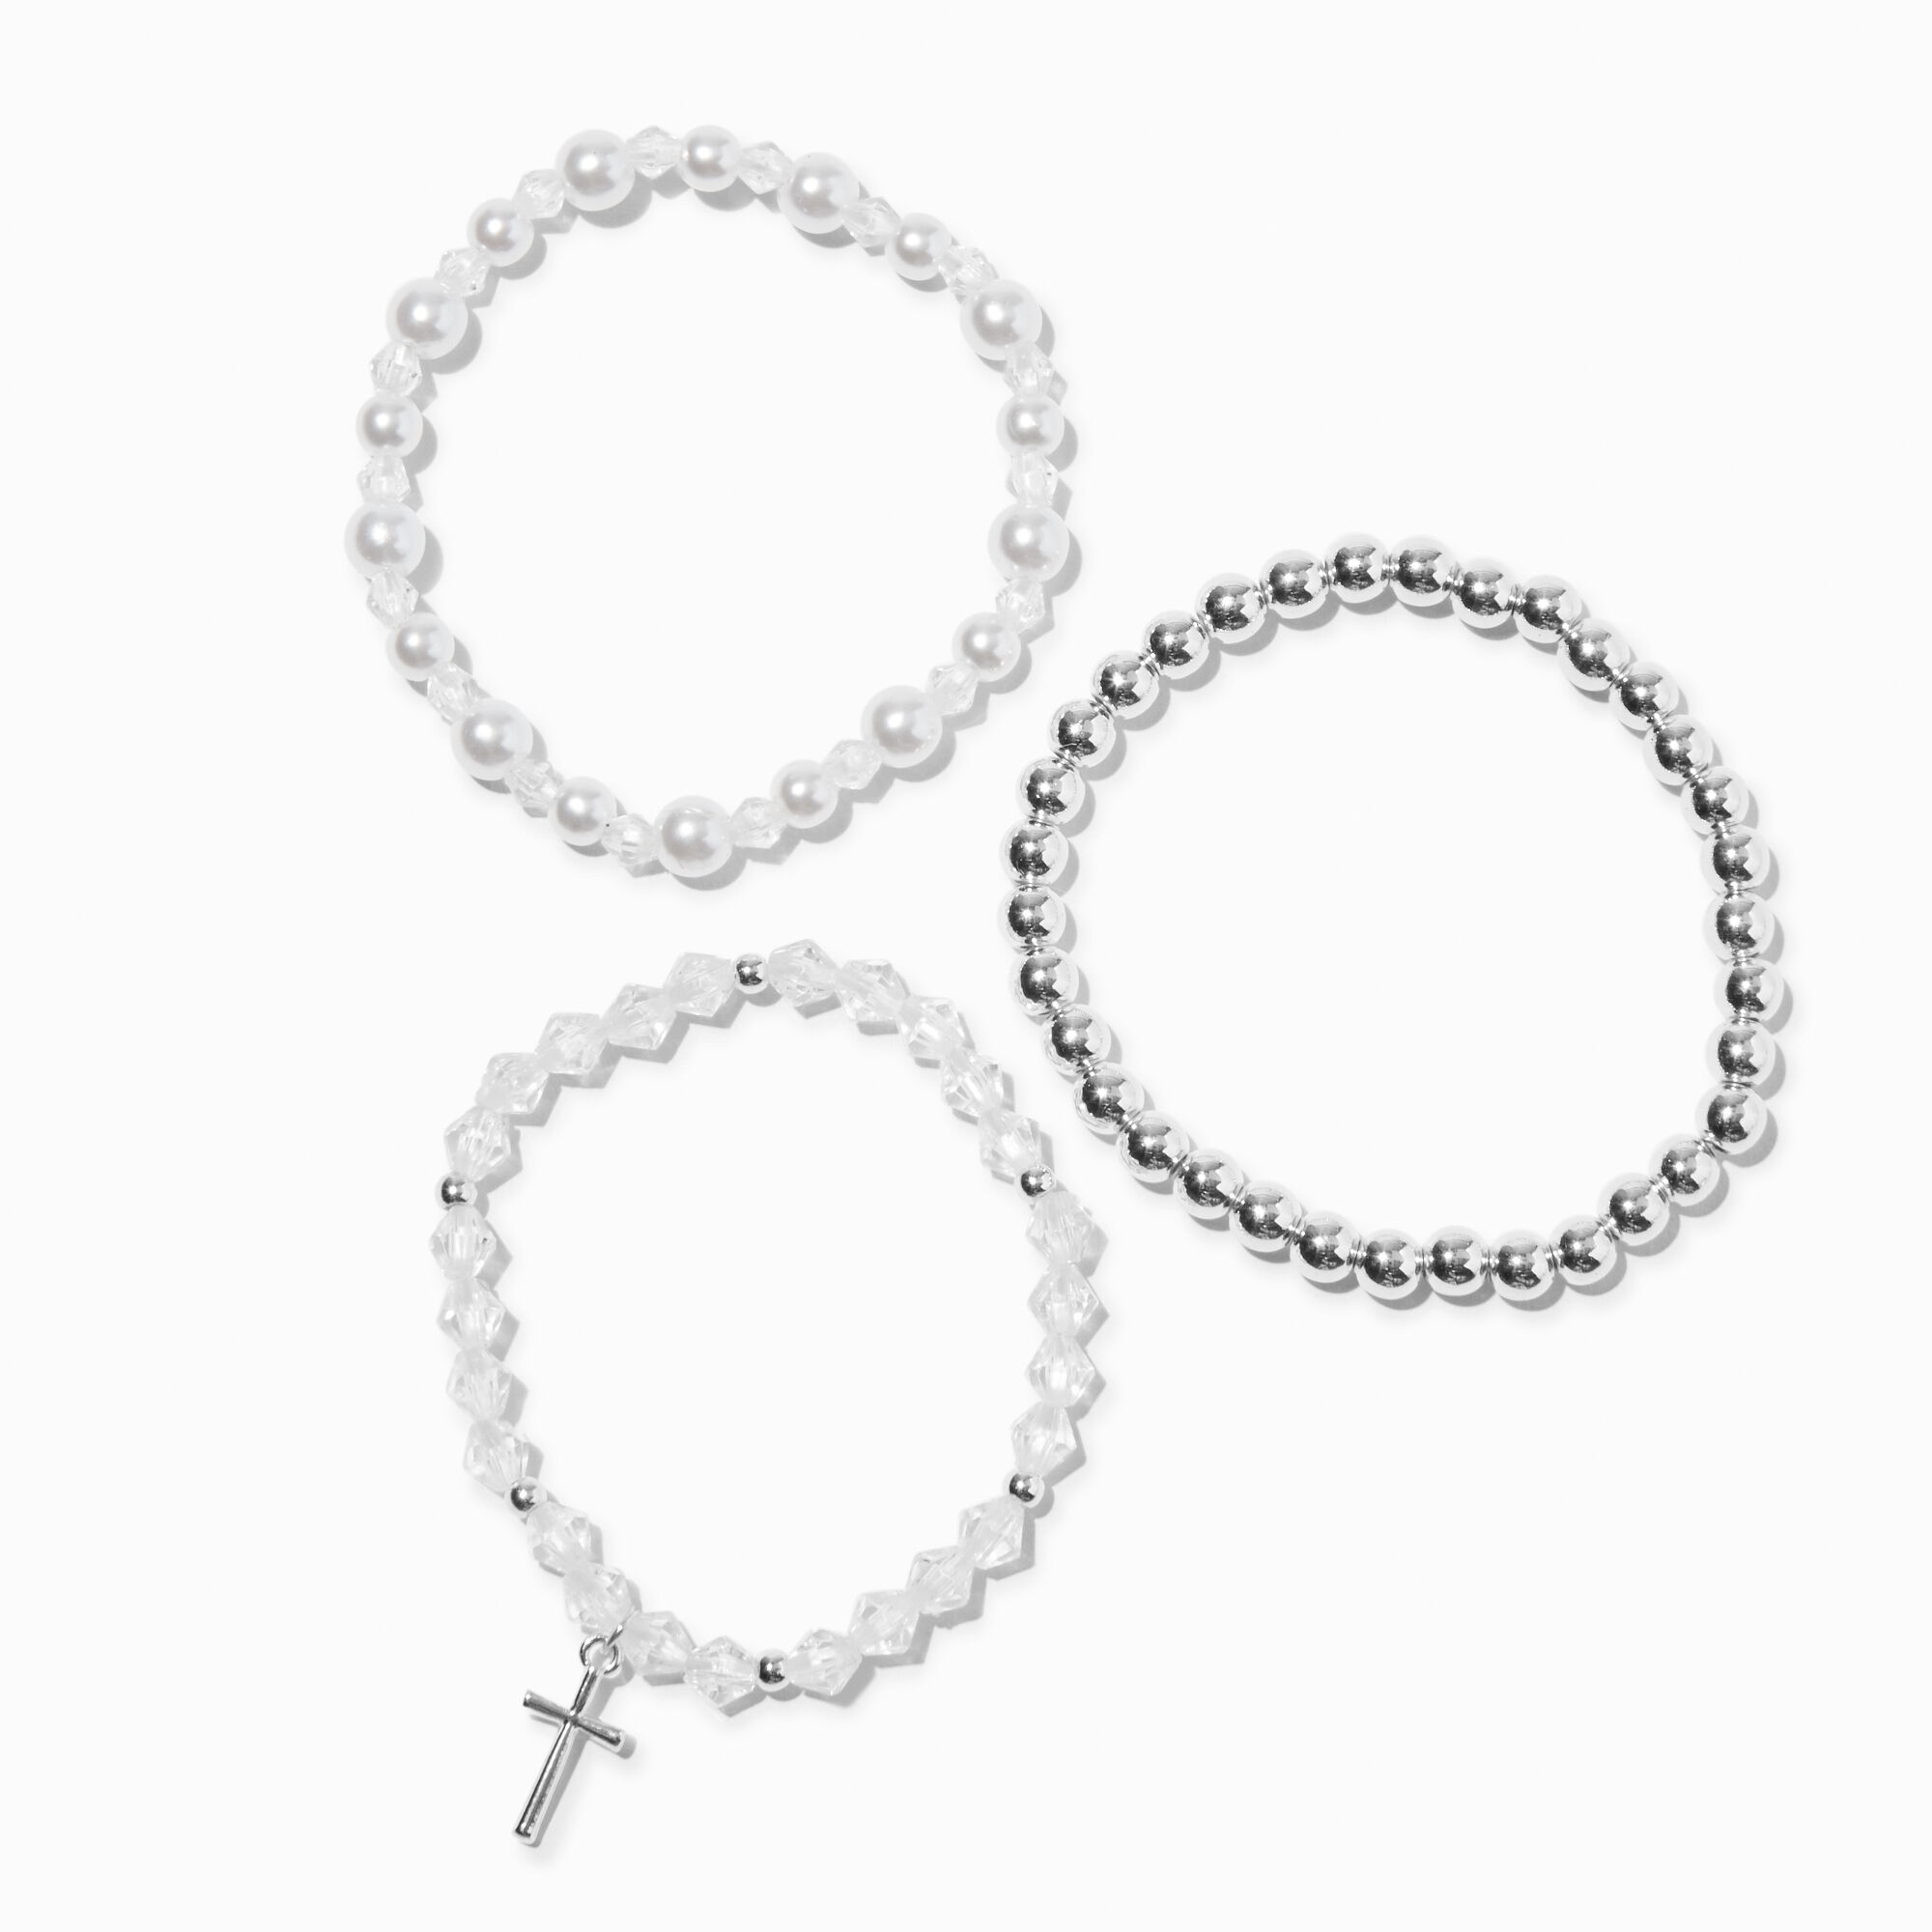 View Claires Club Special Occasion Tone Cross Stretch Bracelets 3 Pack Silver information